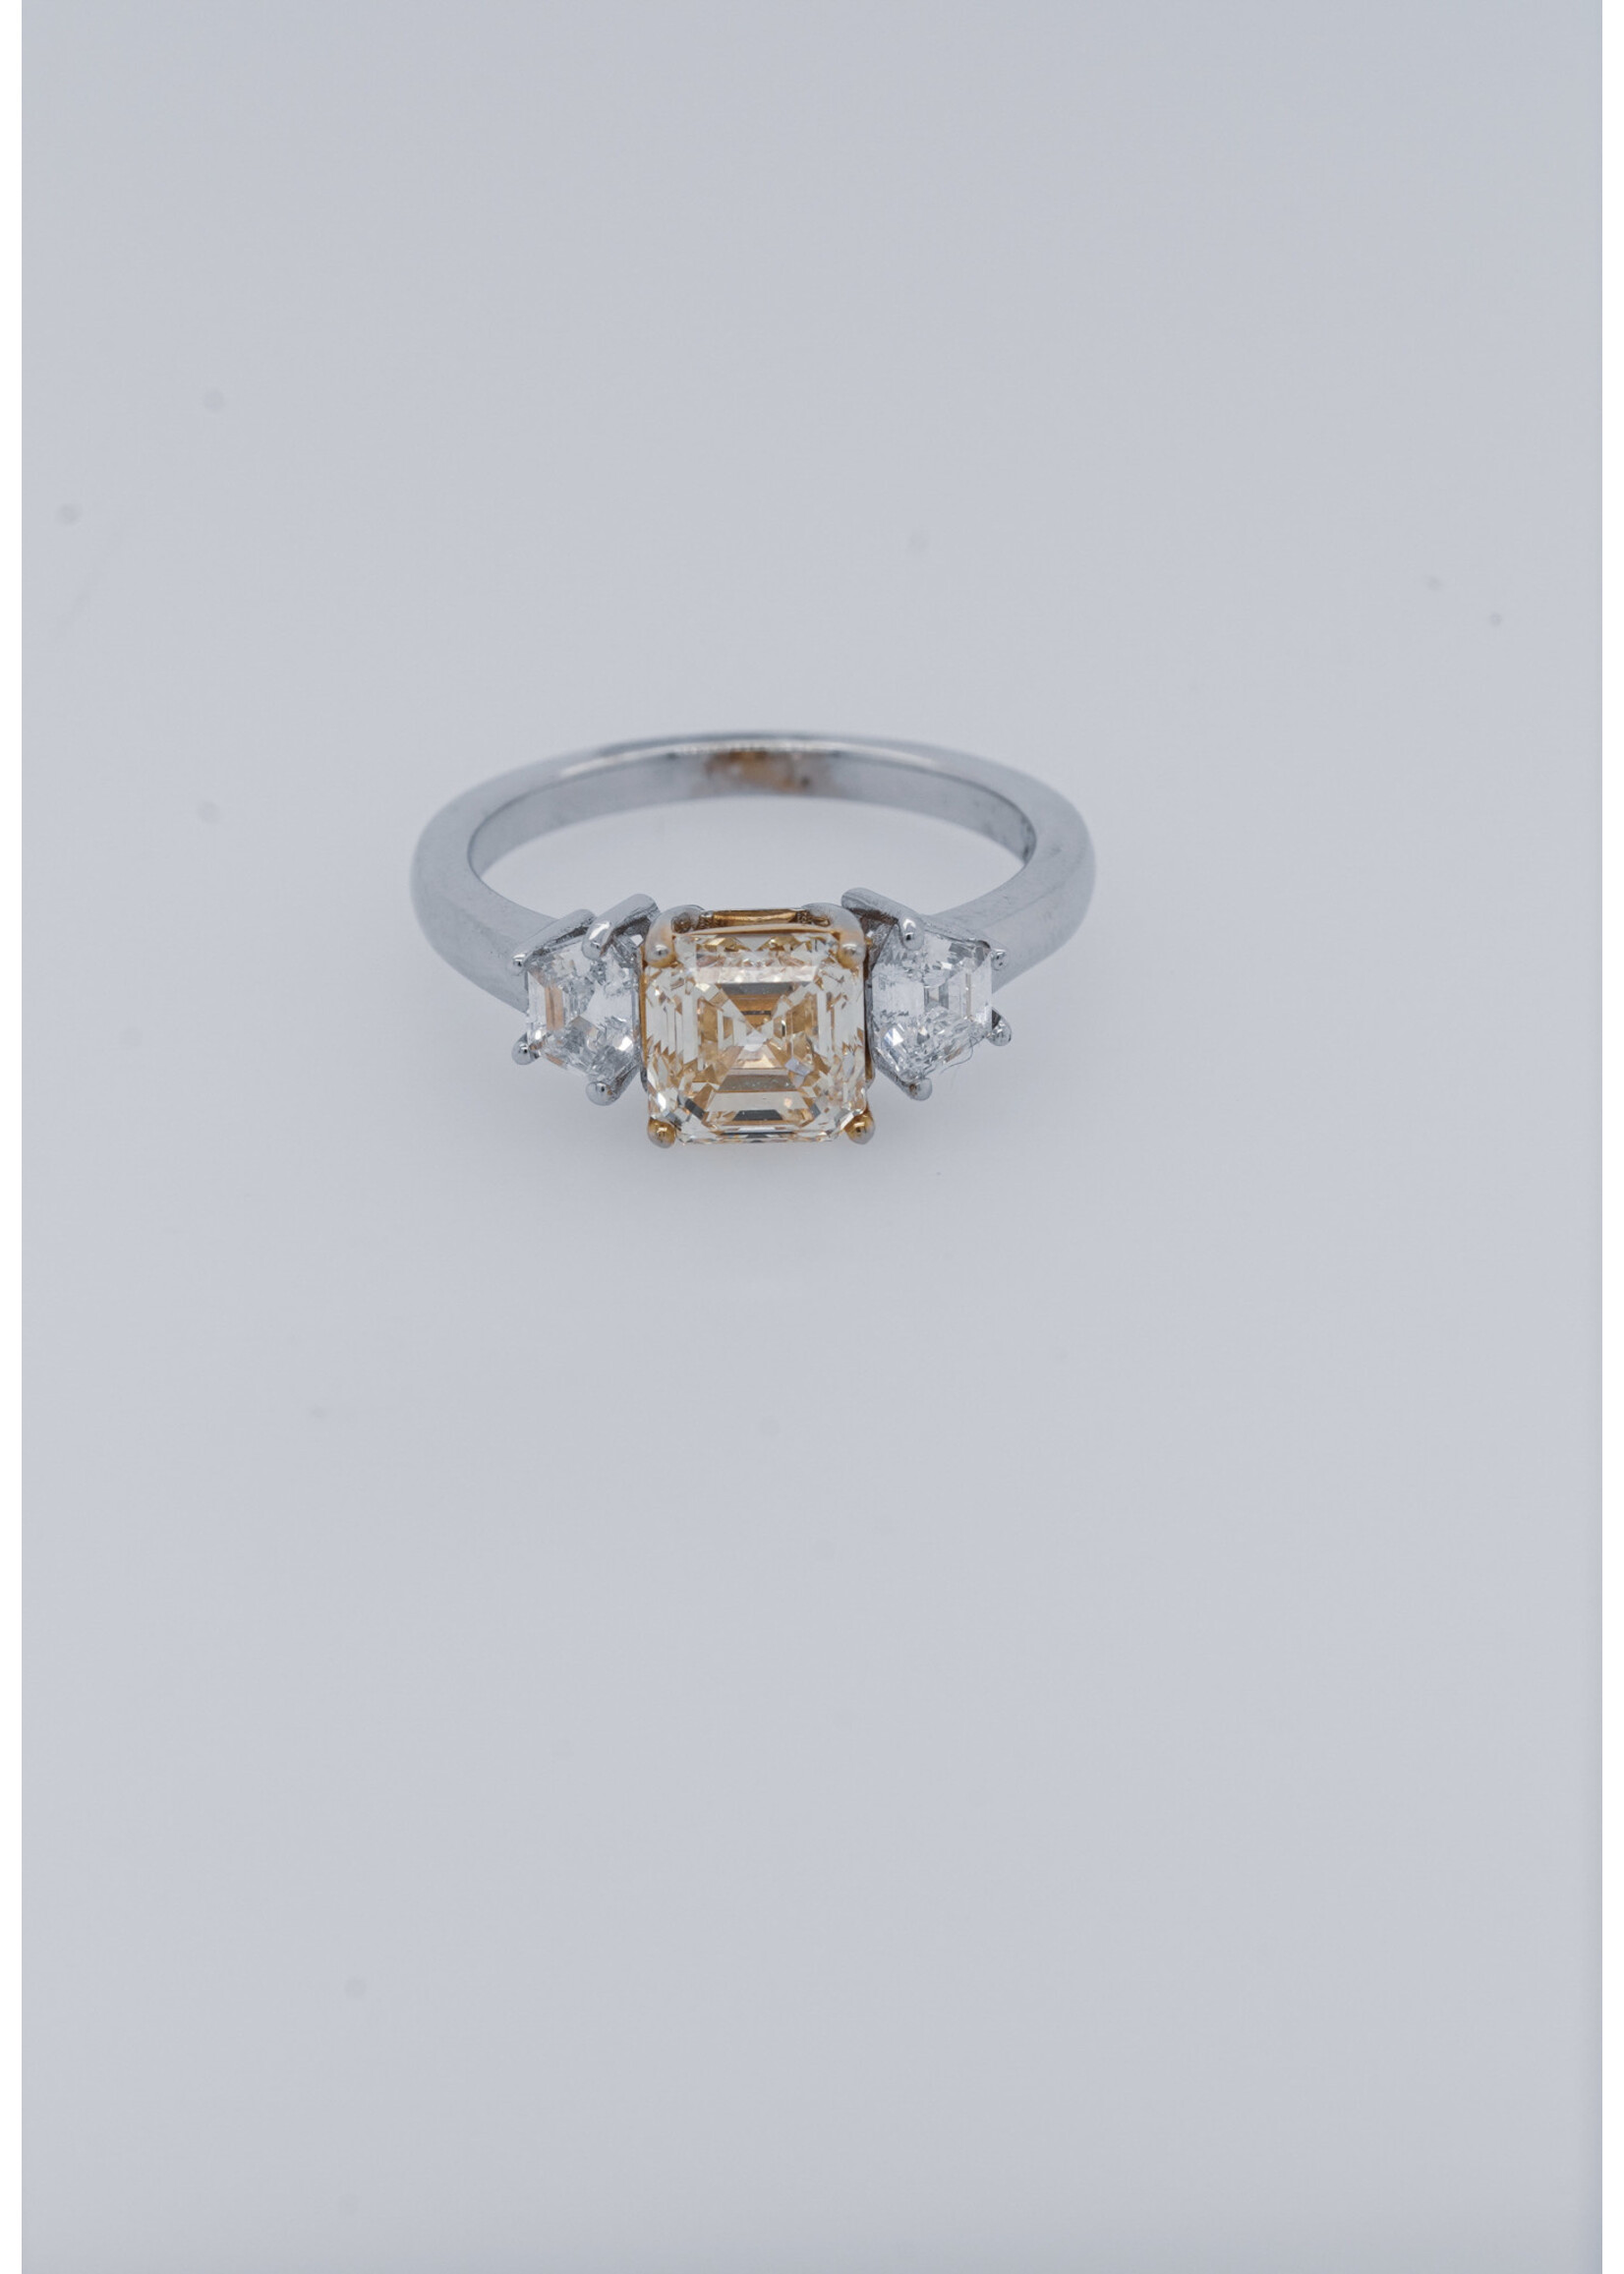 14/18KWY 3.76g 2.25ctw (1.70ctr) FLY/VS2 Asscher Diamond Three Stone Engagement Ring (size 6.75)